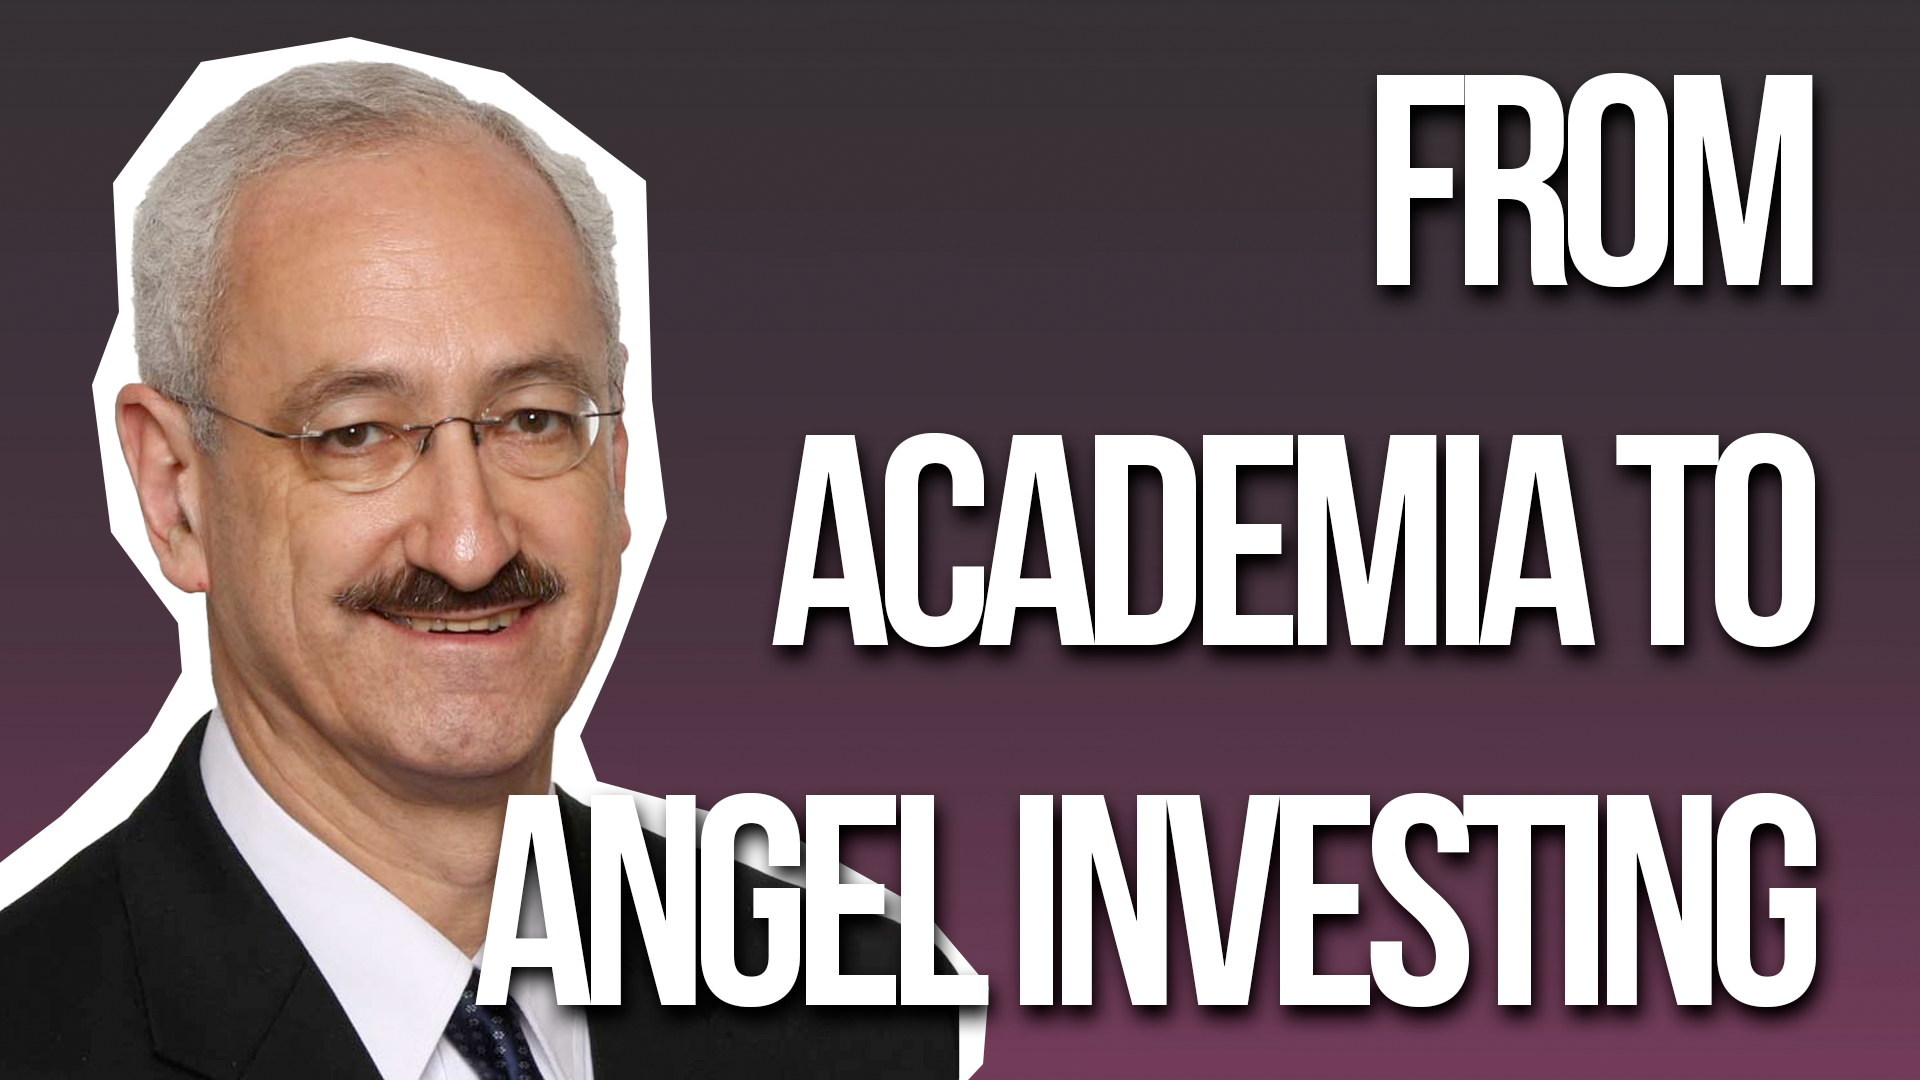 From Academia to Investing